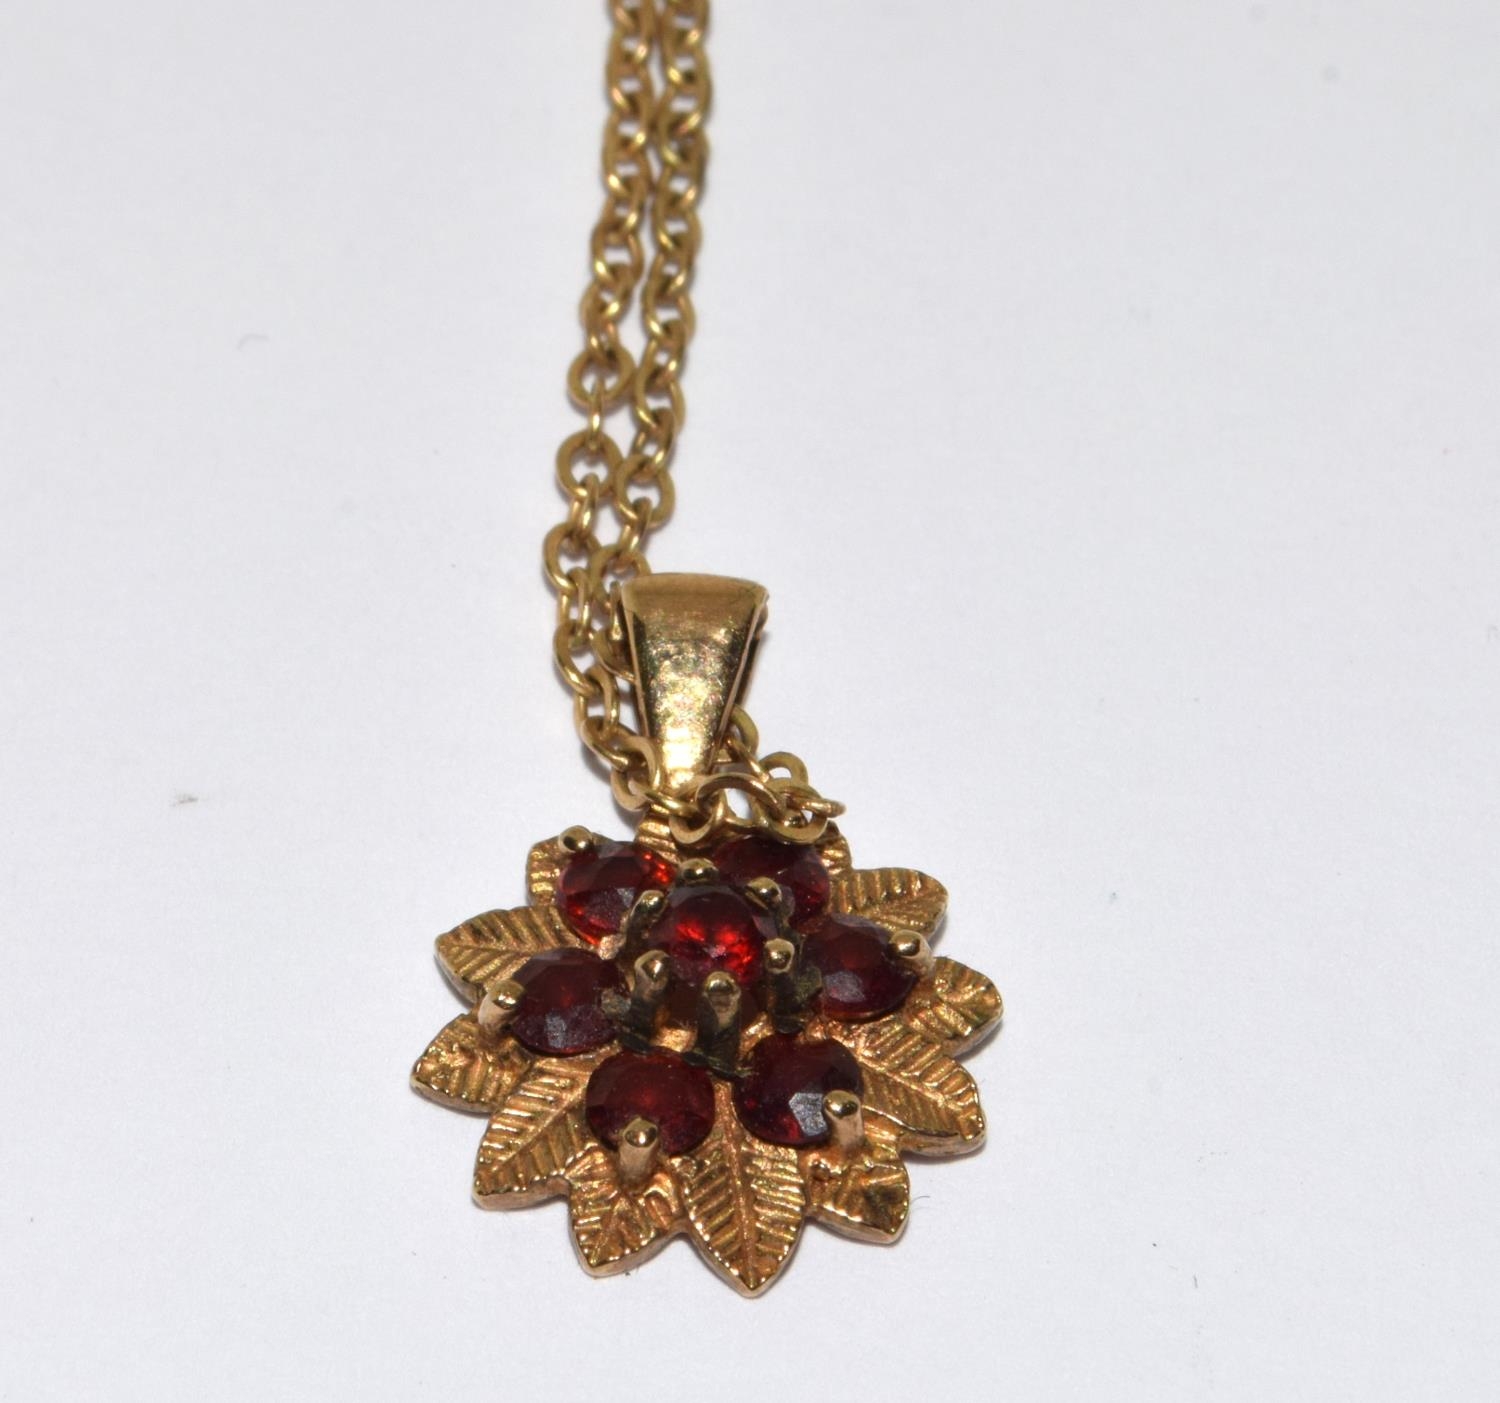 9ct gold Garnet flower cluster pendant necklace and earrings suite - Image 2 of 6